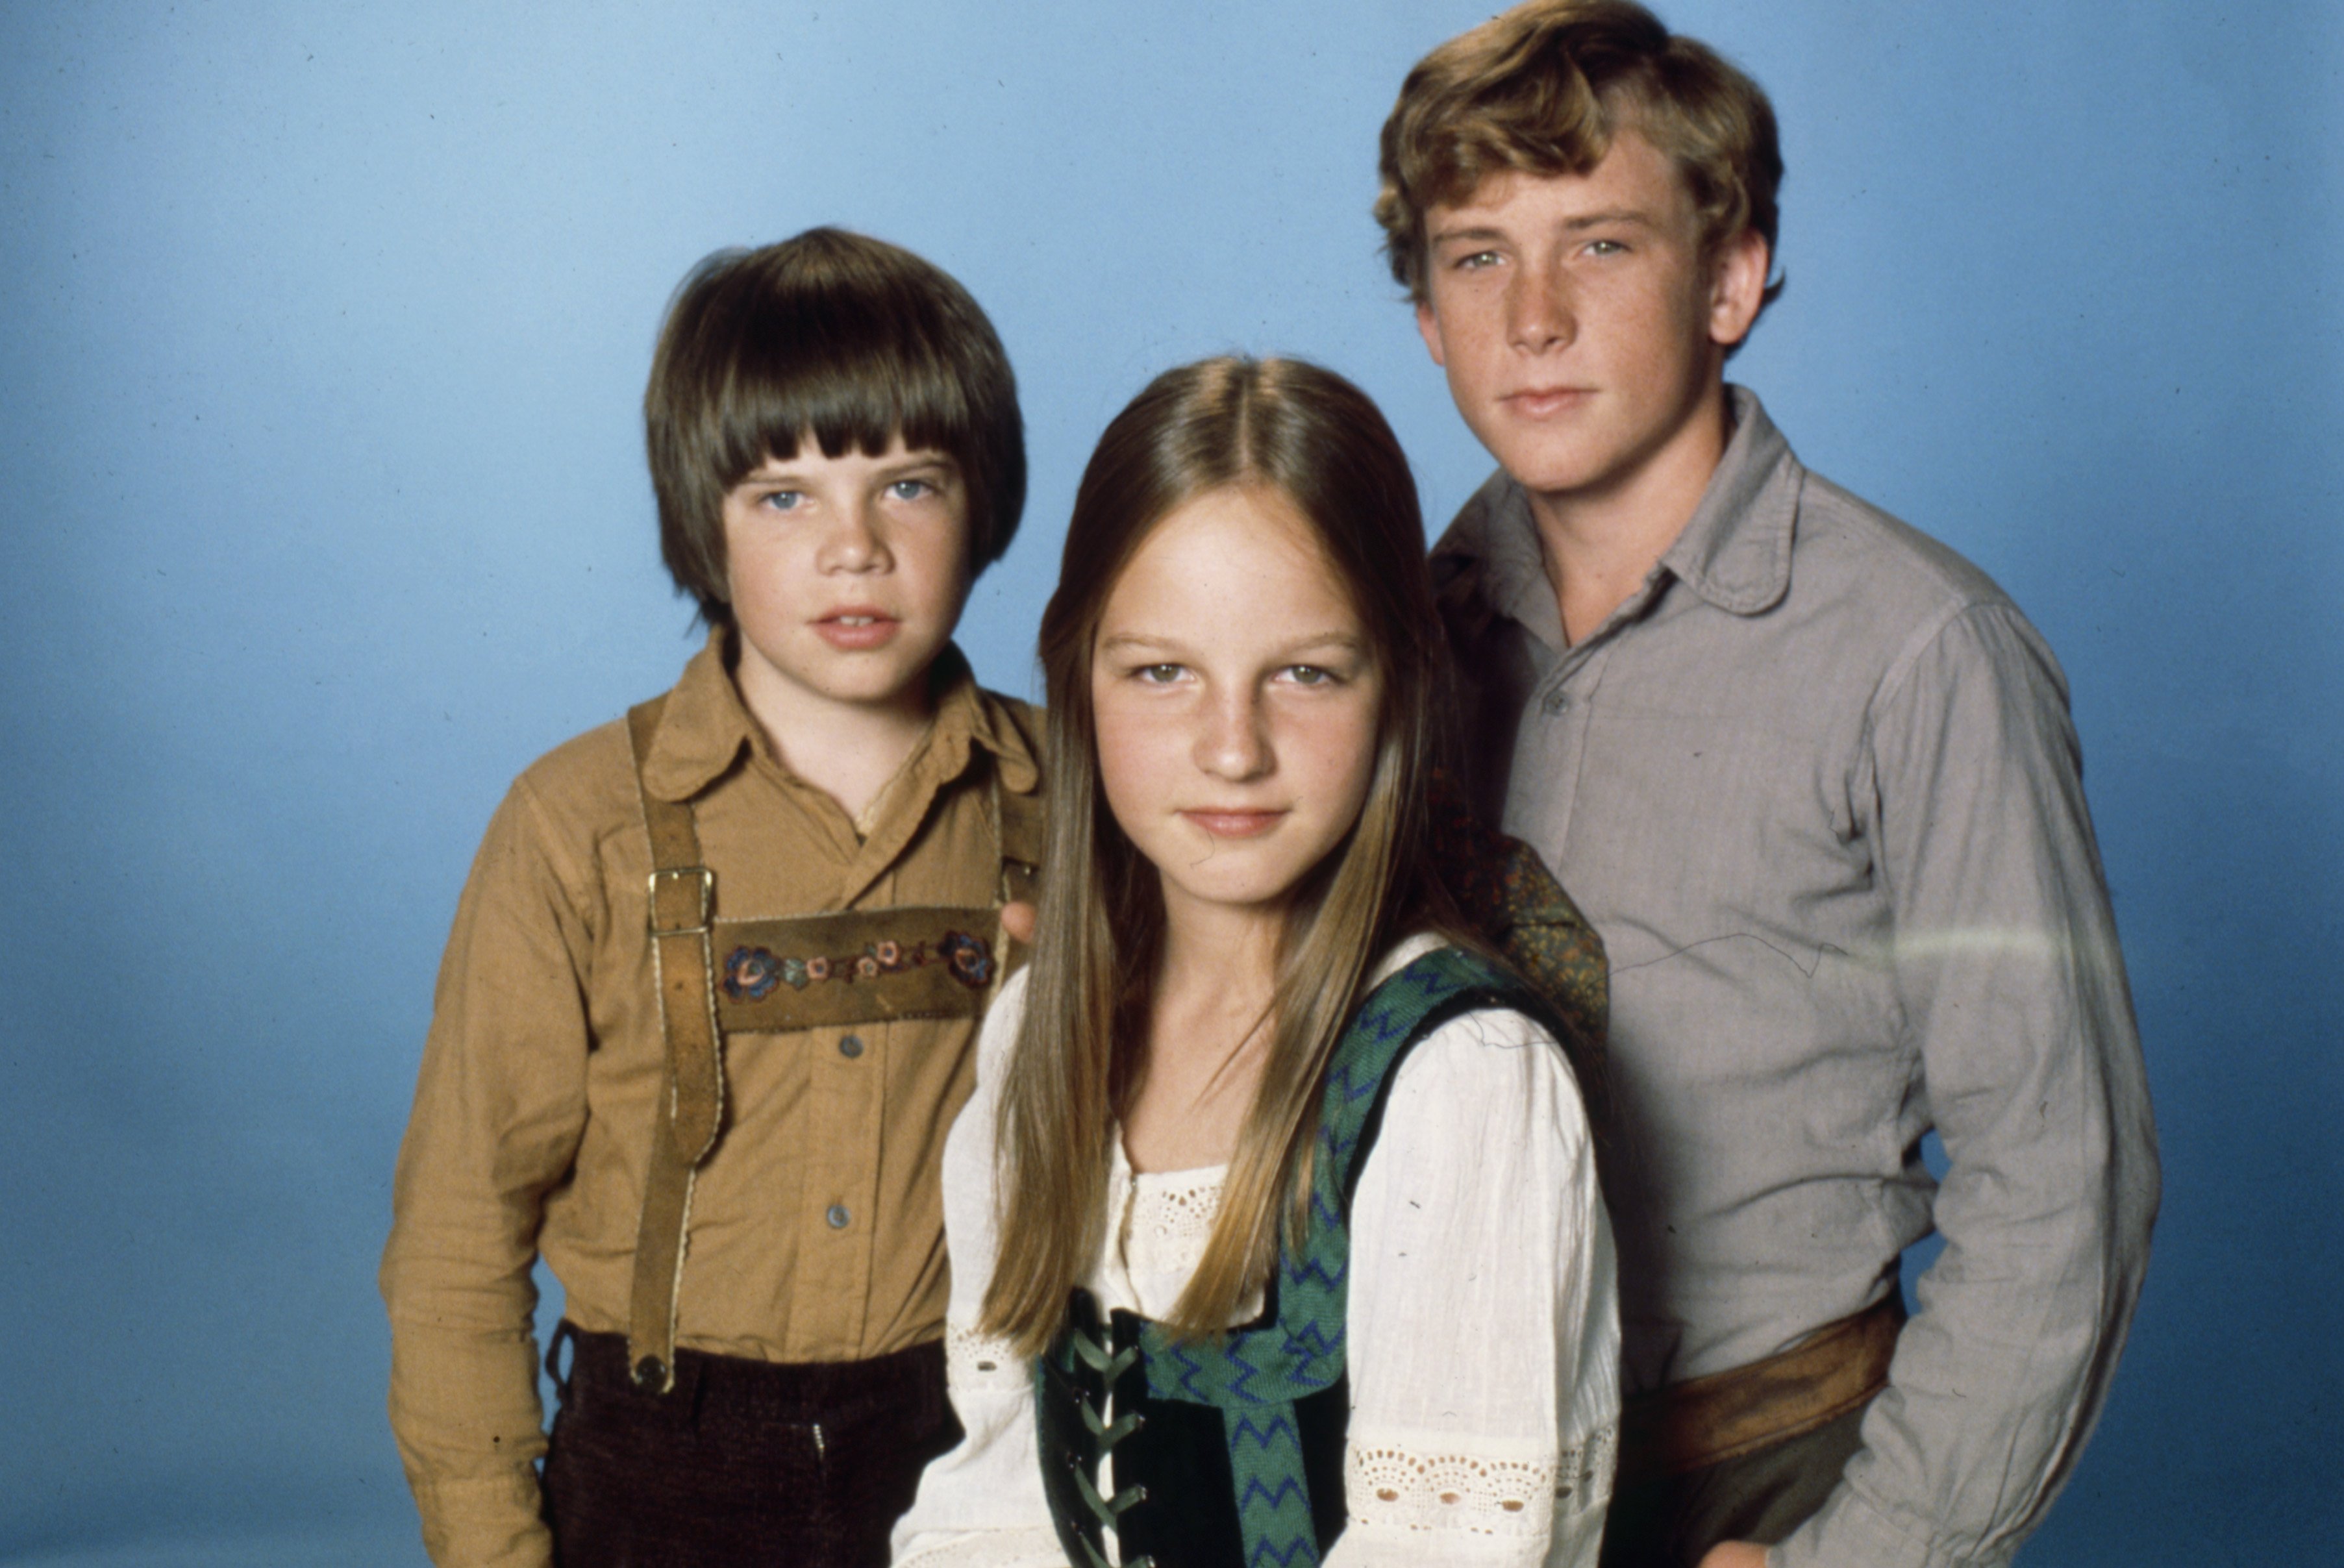 Eric Olson, Helen Hunt, Willie Aames pose for a promotional photo for the ABC tv series 'Swiss Family Robinson'. | Source: Getty Images